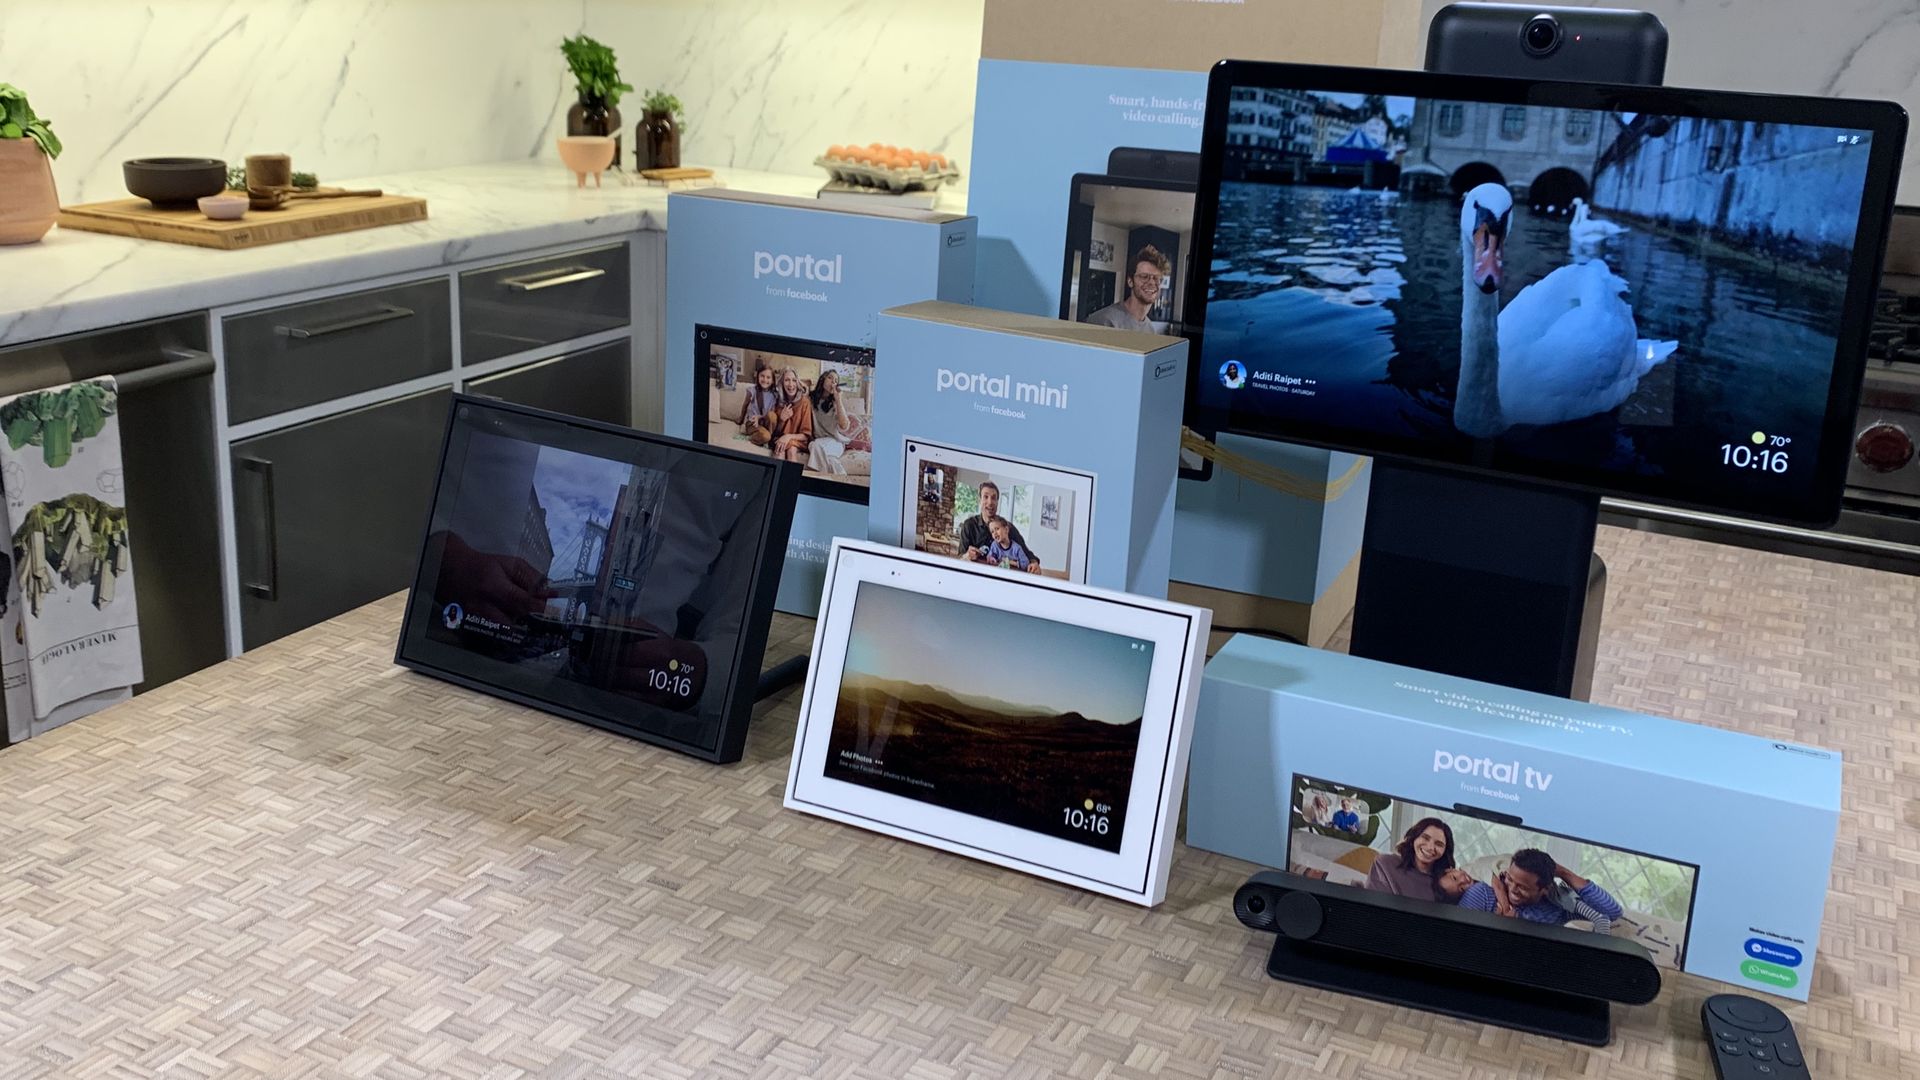 Facebook's expanded family of Portal devices in a kitchen